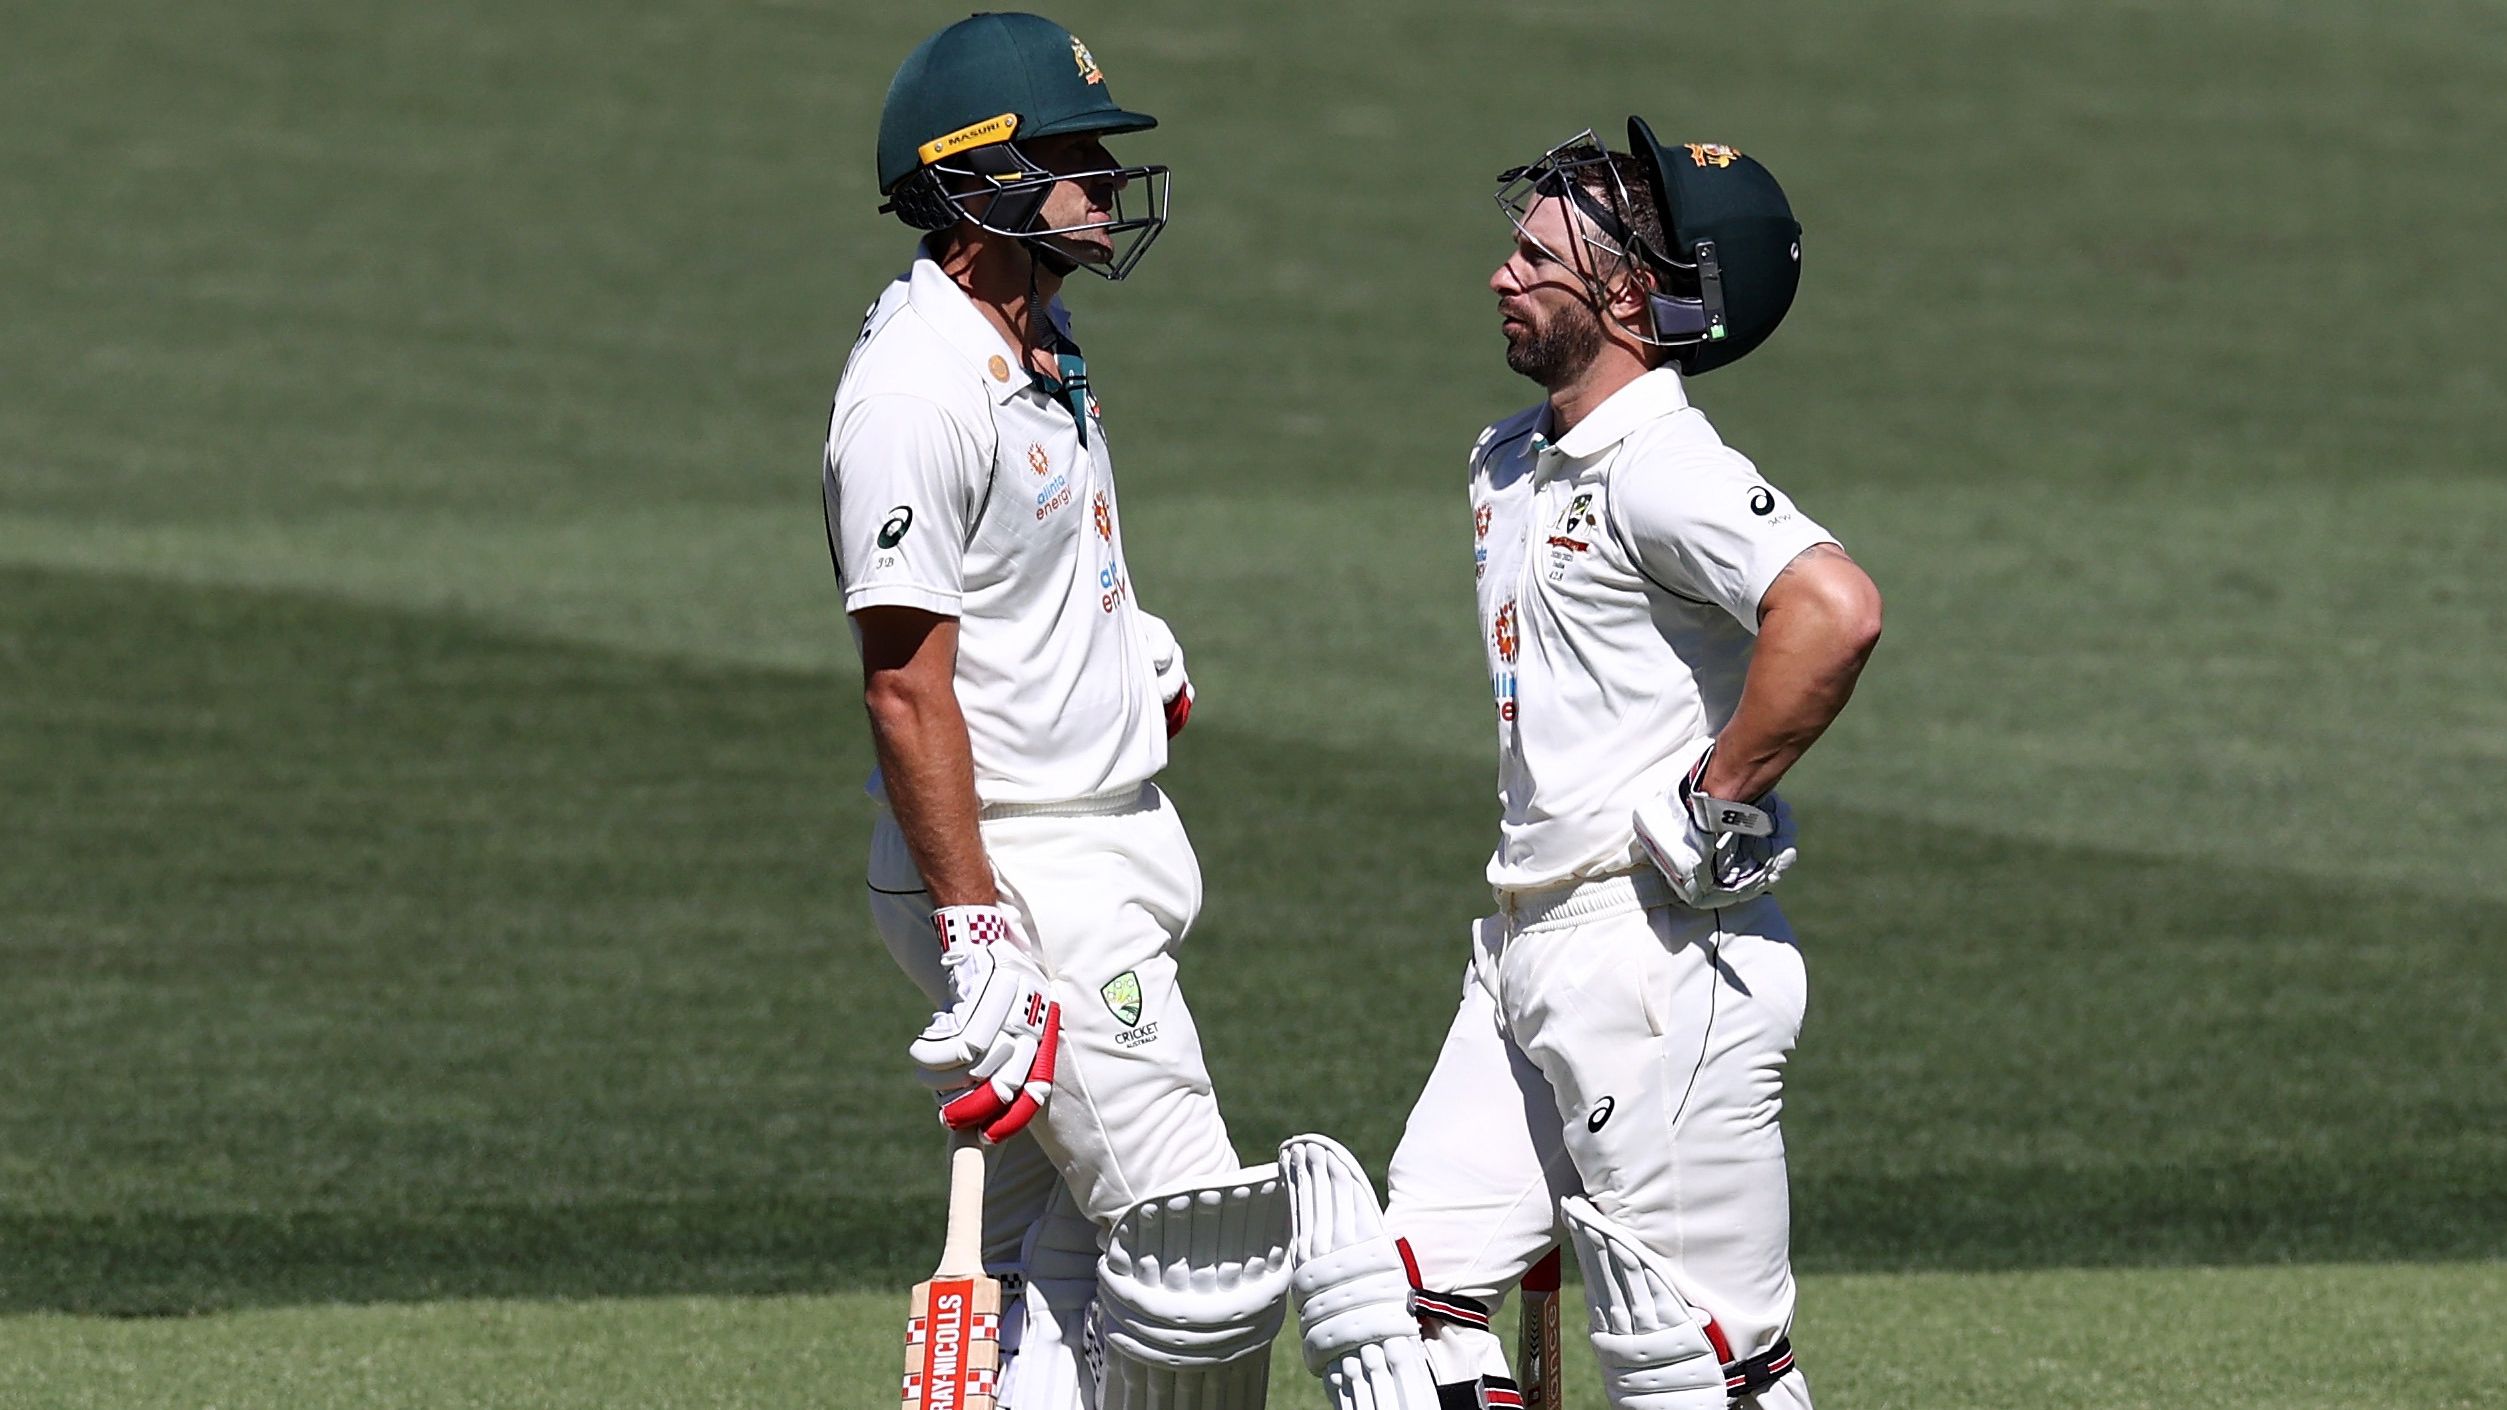 EXCLUSIVE: Aussie openers Joe Burns and Matthew Wade fighting for careers after Adelaide failures